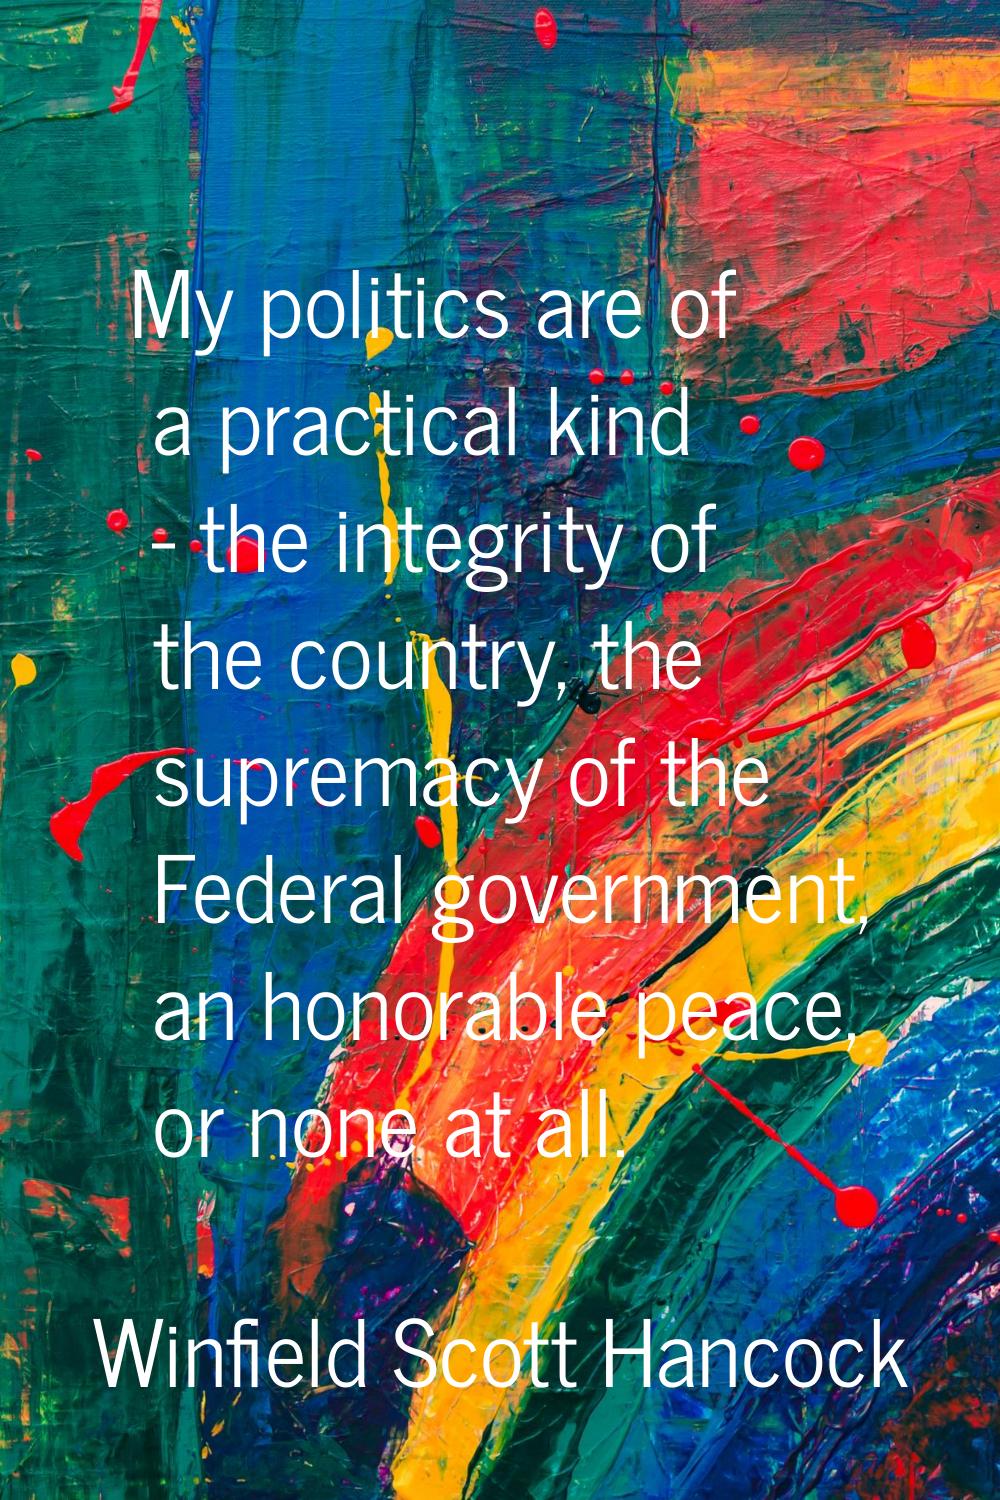 My politics are of a practical kind - the integrity of the country, the supremacy of the Federal go